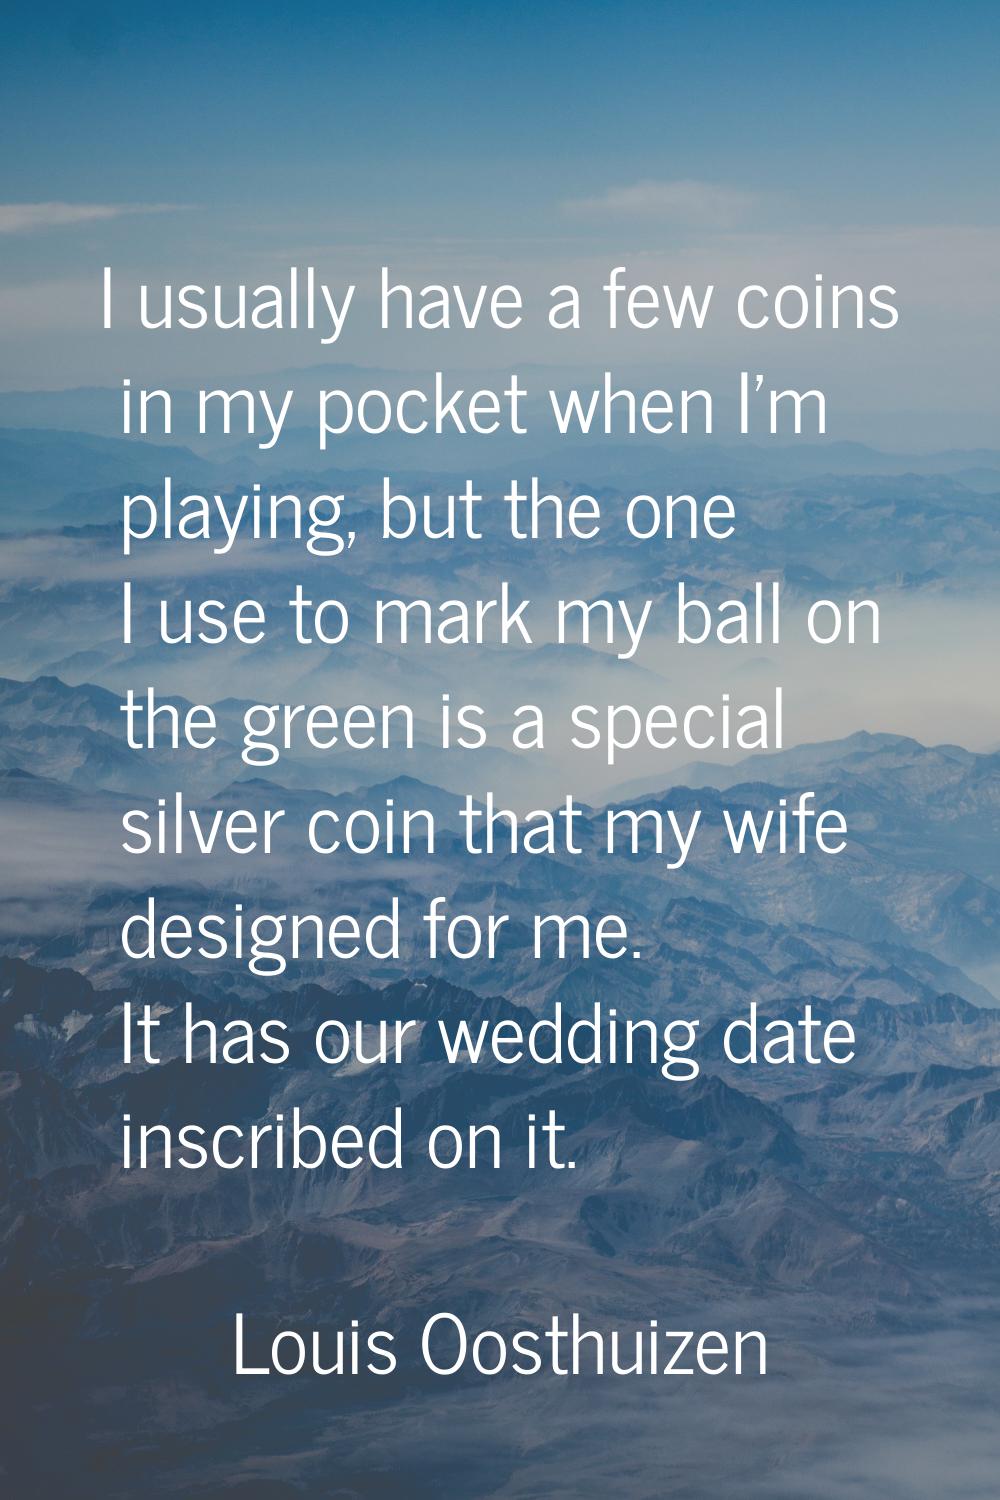 I usually have a few coins in my pocket when I'm playing, but the one I use to mark my ball on the 